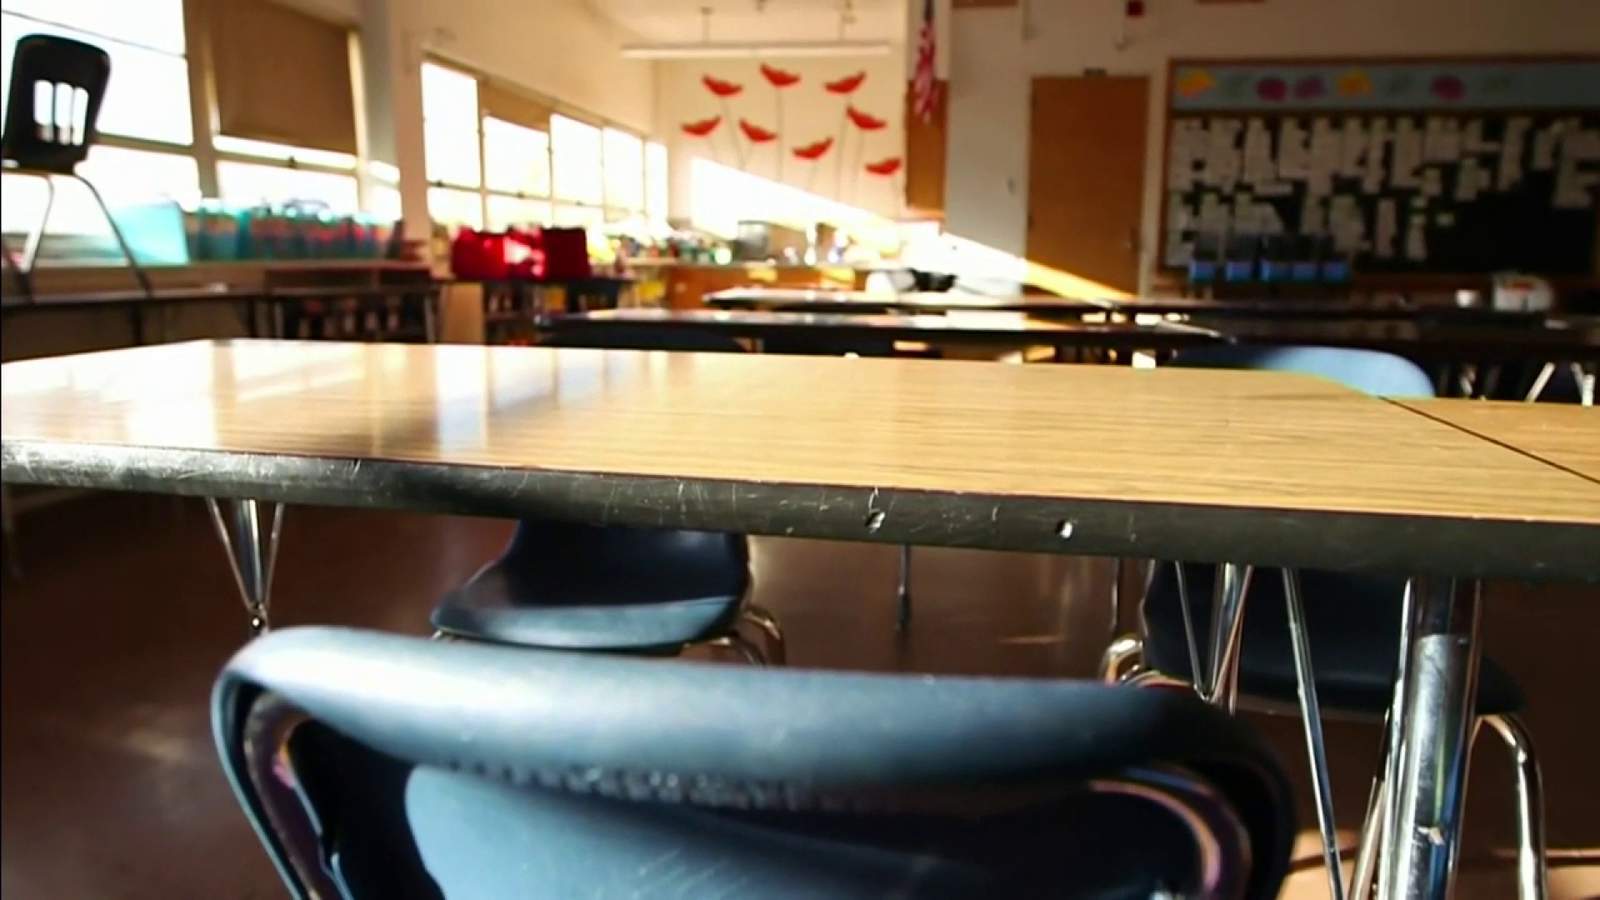 Hundreds of students are missing from South Florida schools